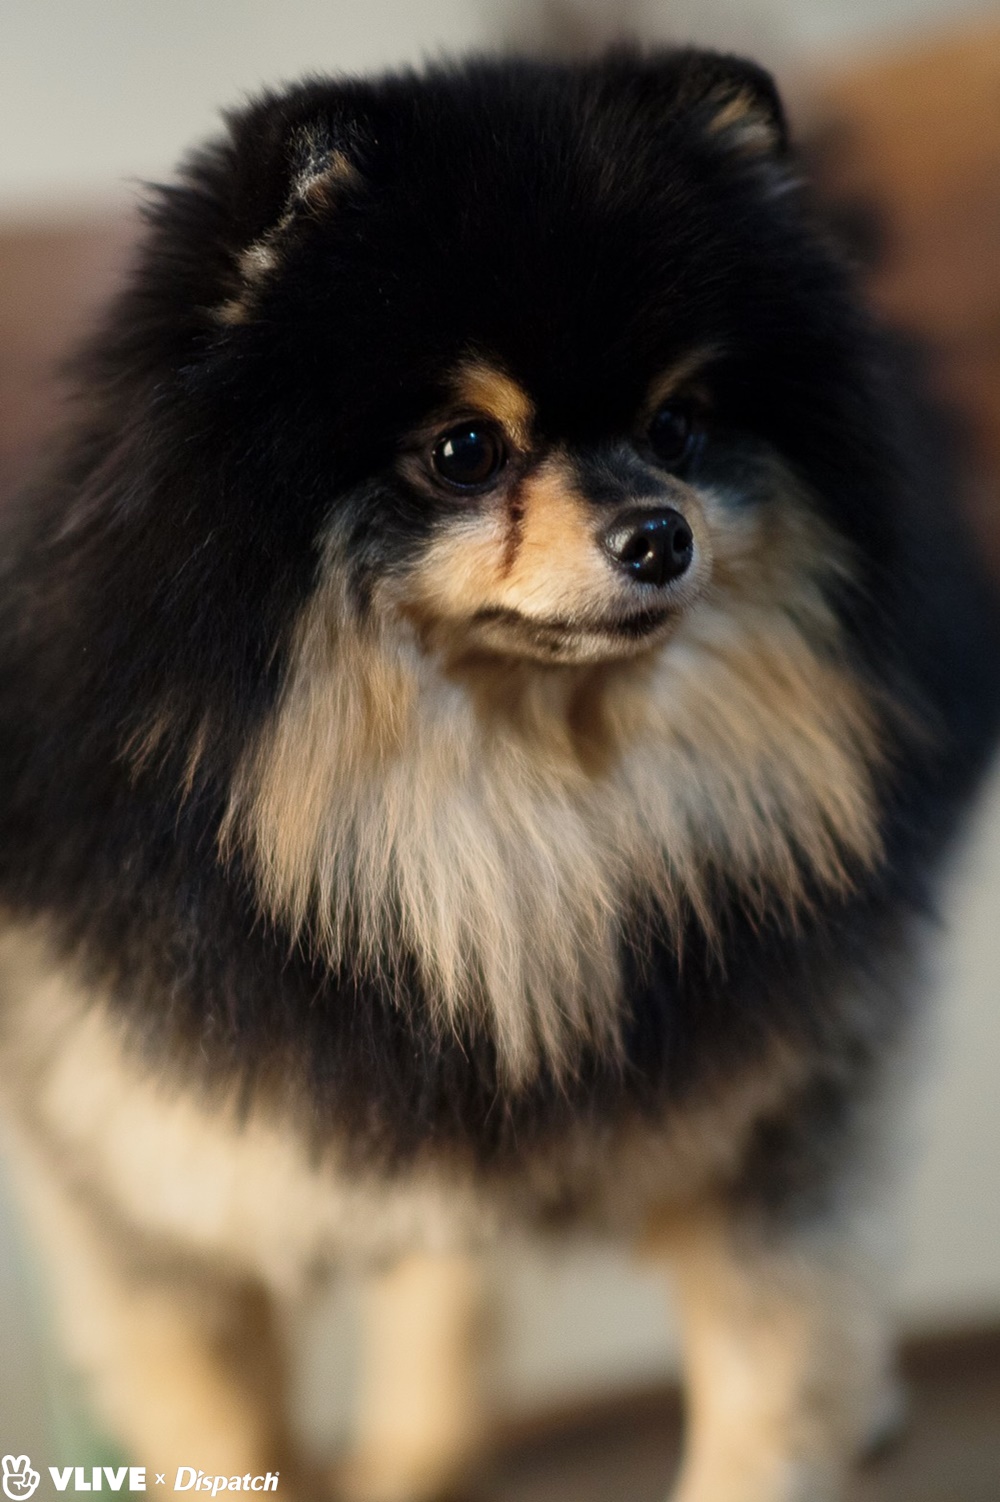  Picture Dispatch BTS   V  With Yeontan B Cut 191231 